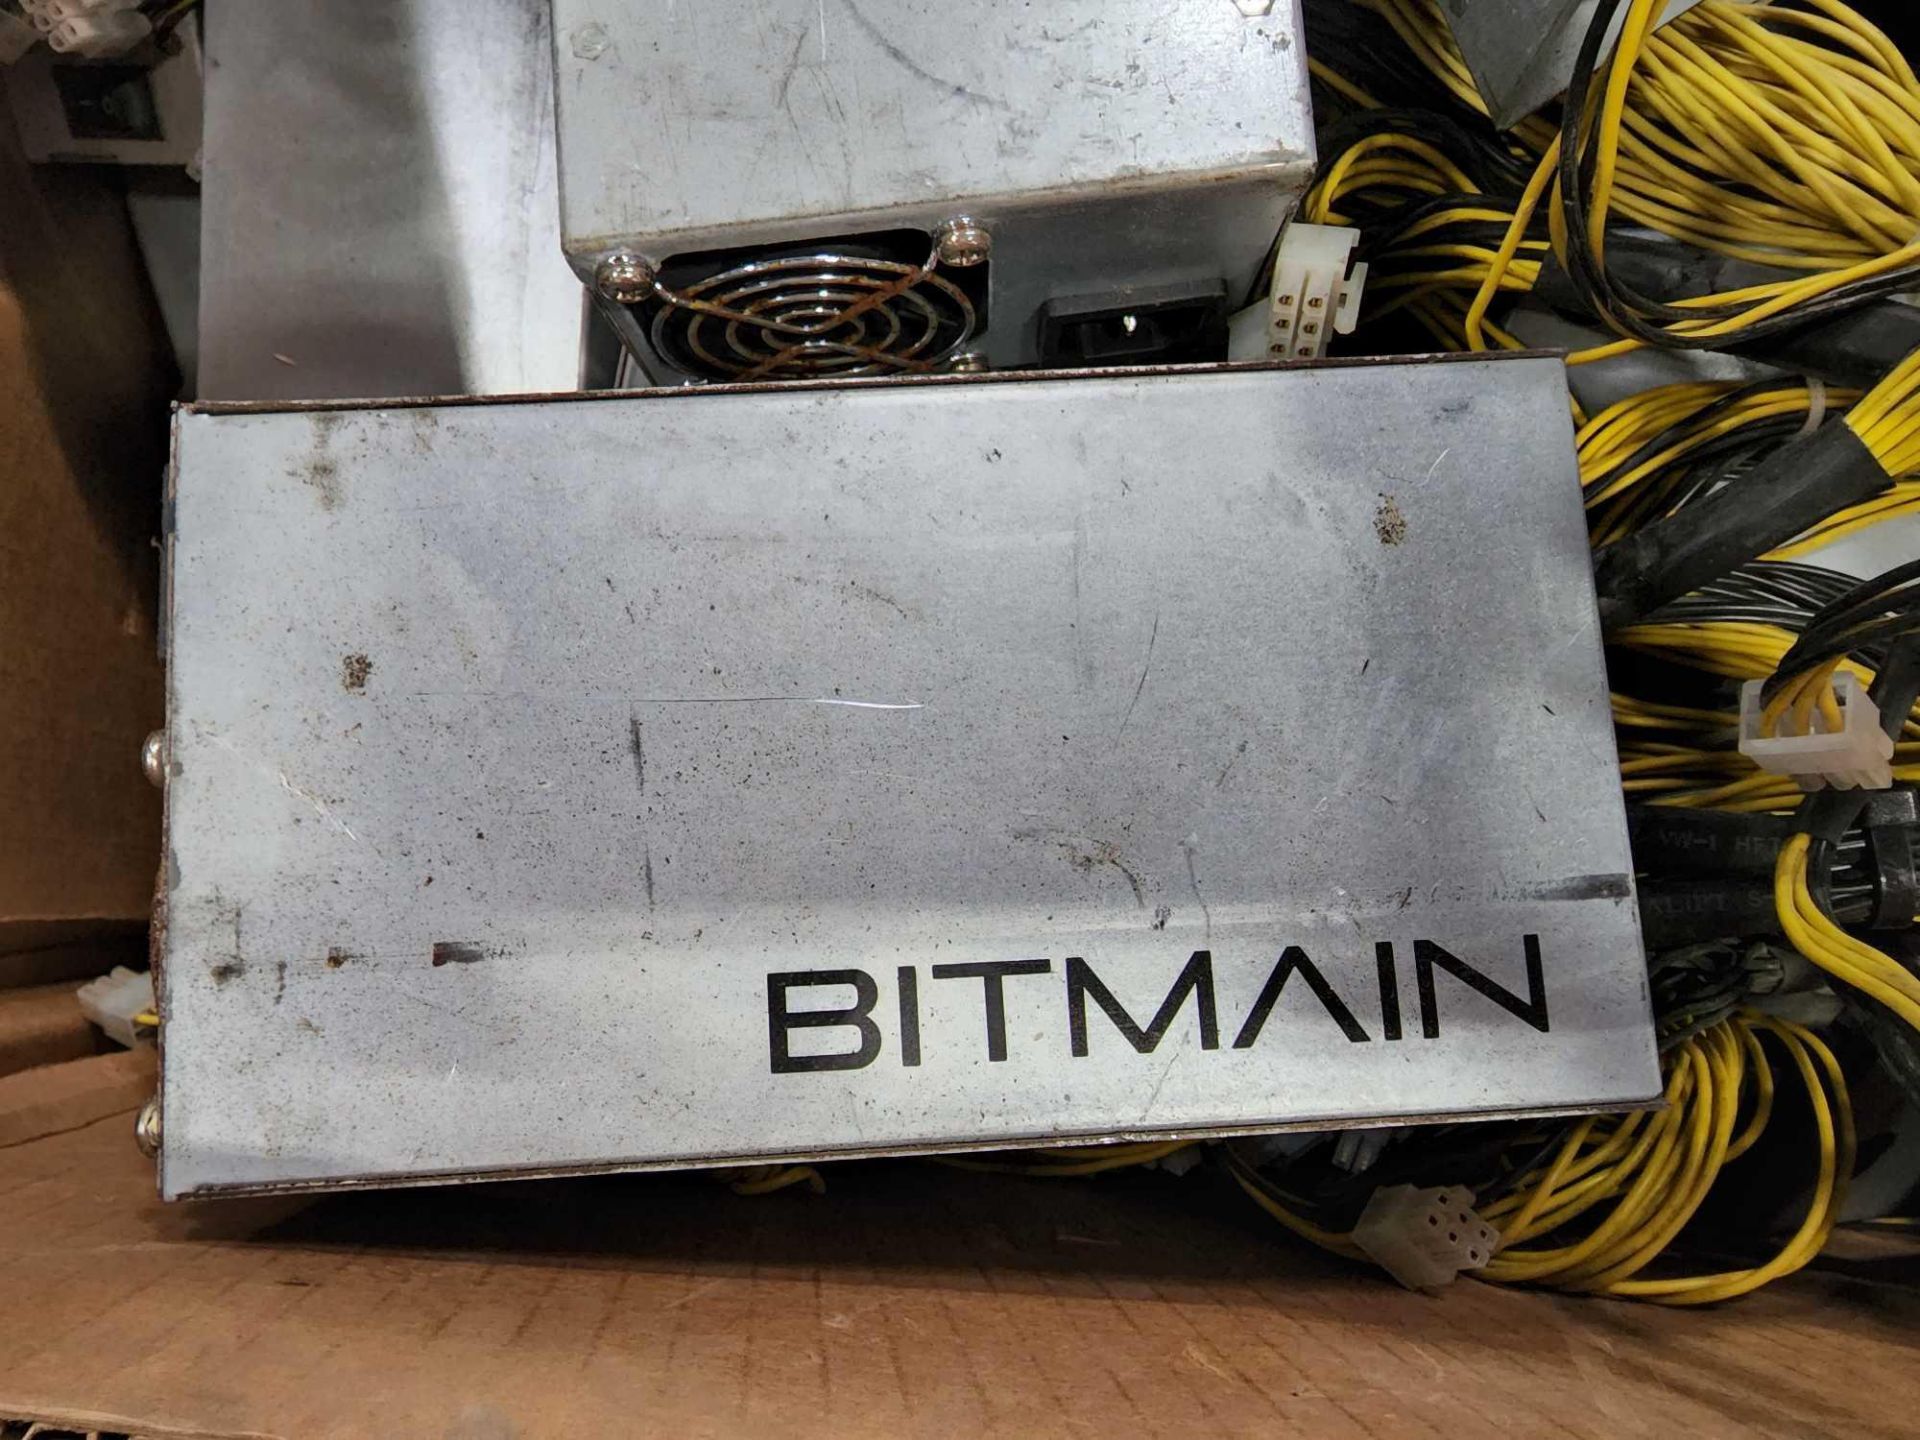 Bitmain Products - Image 2 of 4